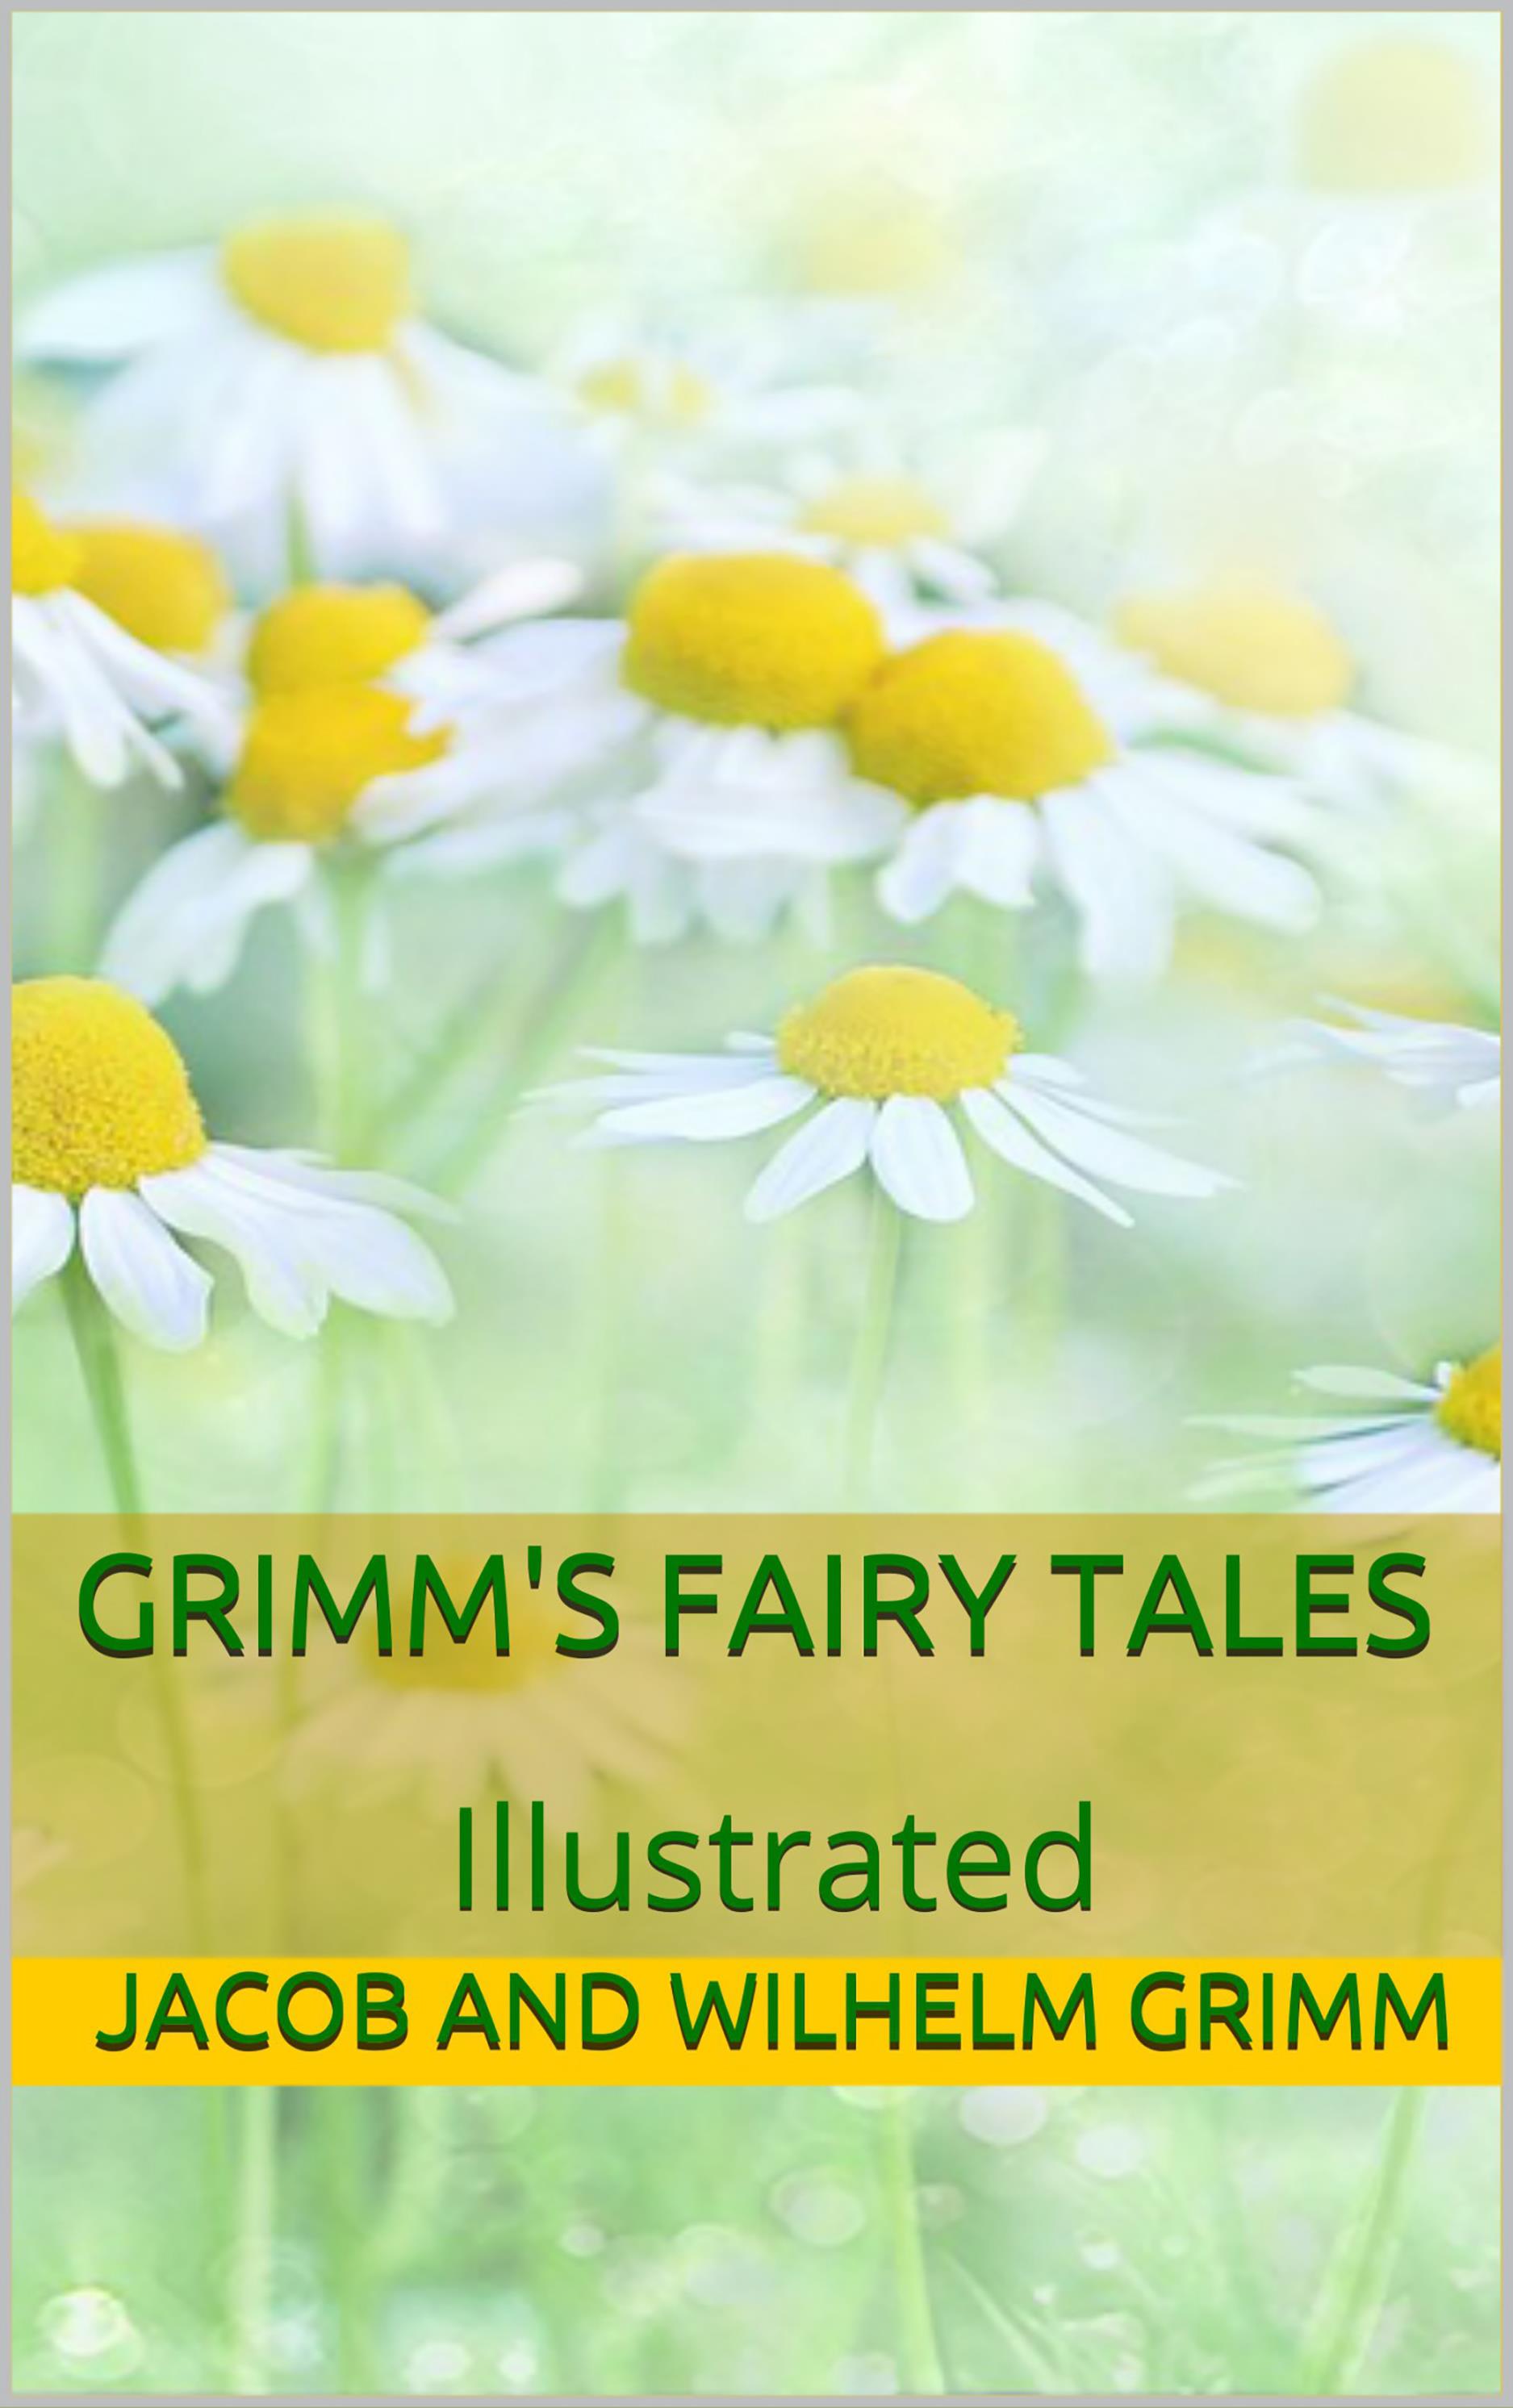 Grimms’ Fairy Tales - Illustrated